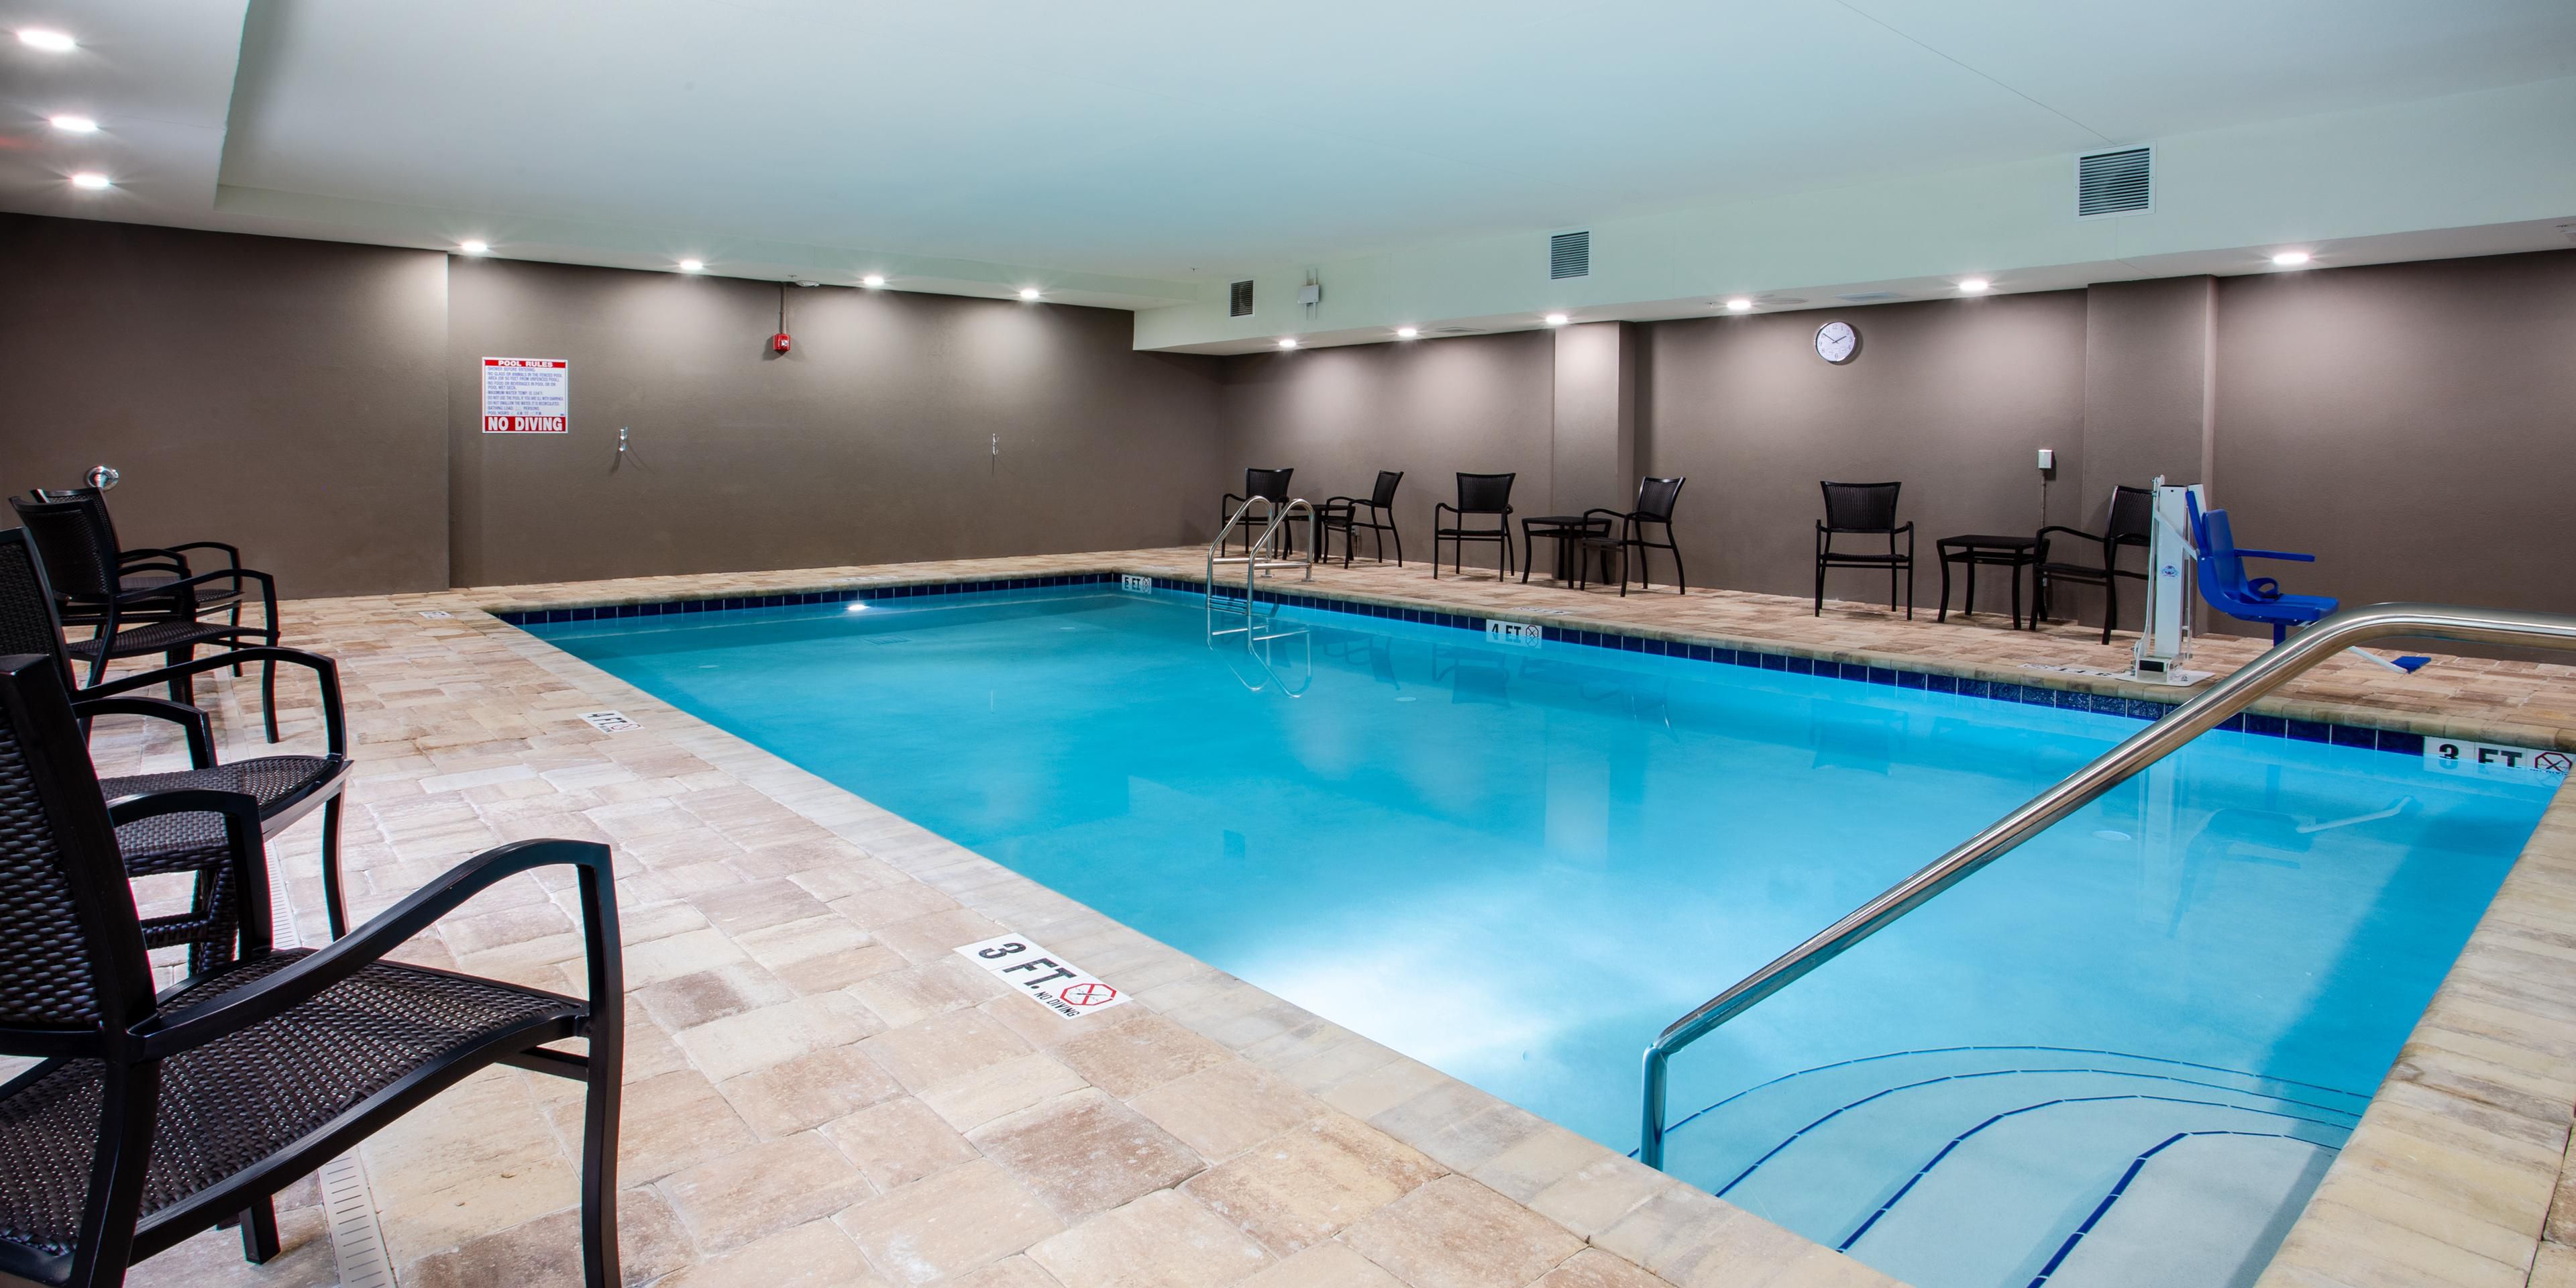 The Holiday Inn Express & Suites DeLand South features an indoor pool, a rare find in Florida! This allows you to take a swim no matter what the weather! Sunseekers worry not, we have an outdoor area for you to soak up the rays as well. 